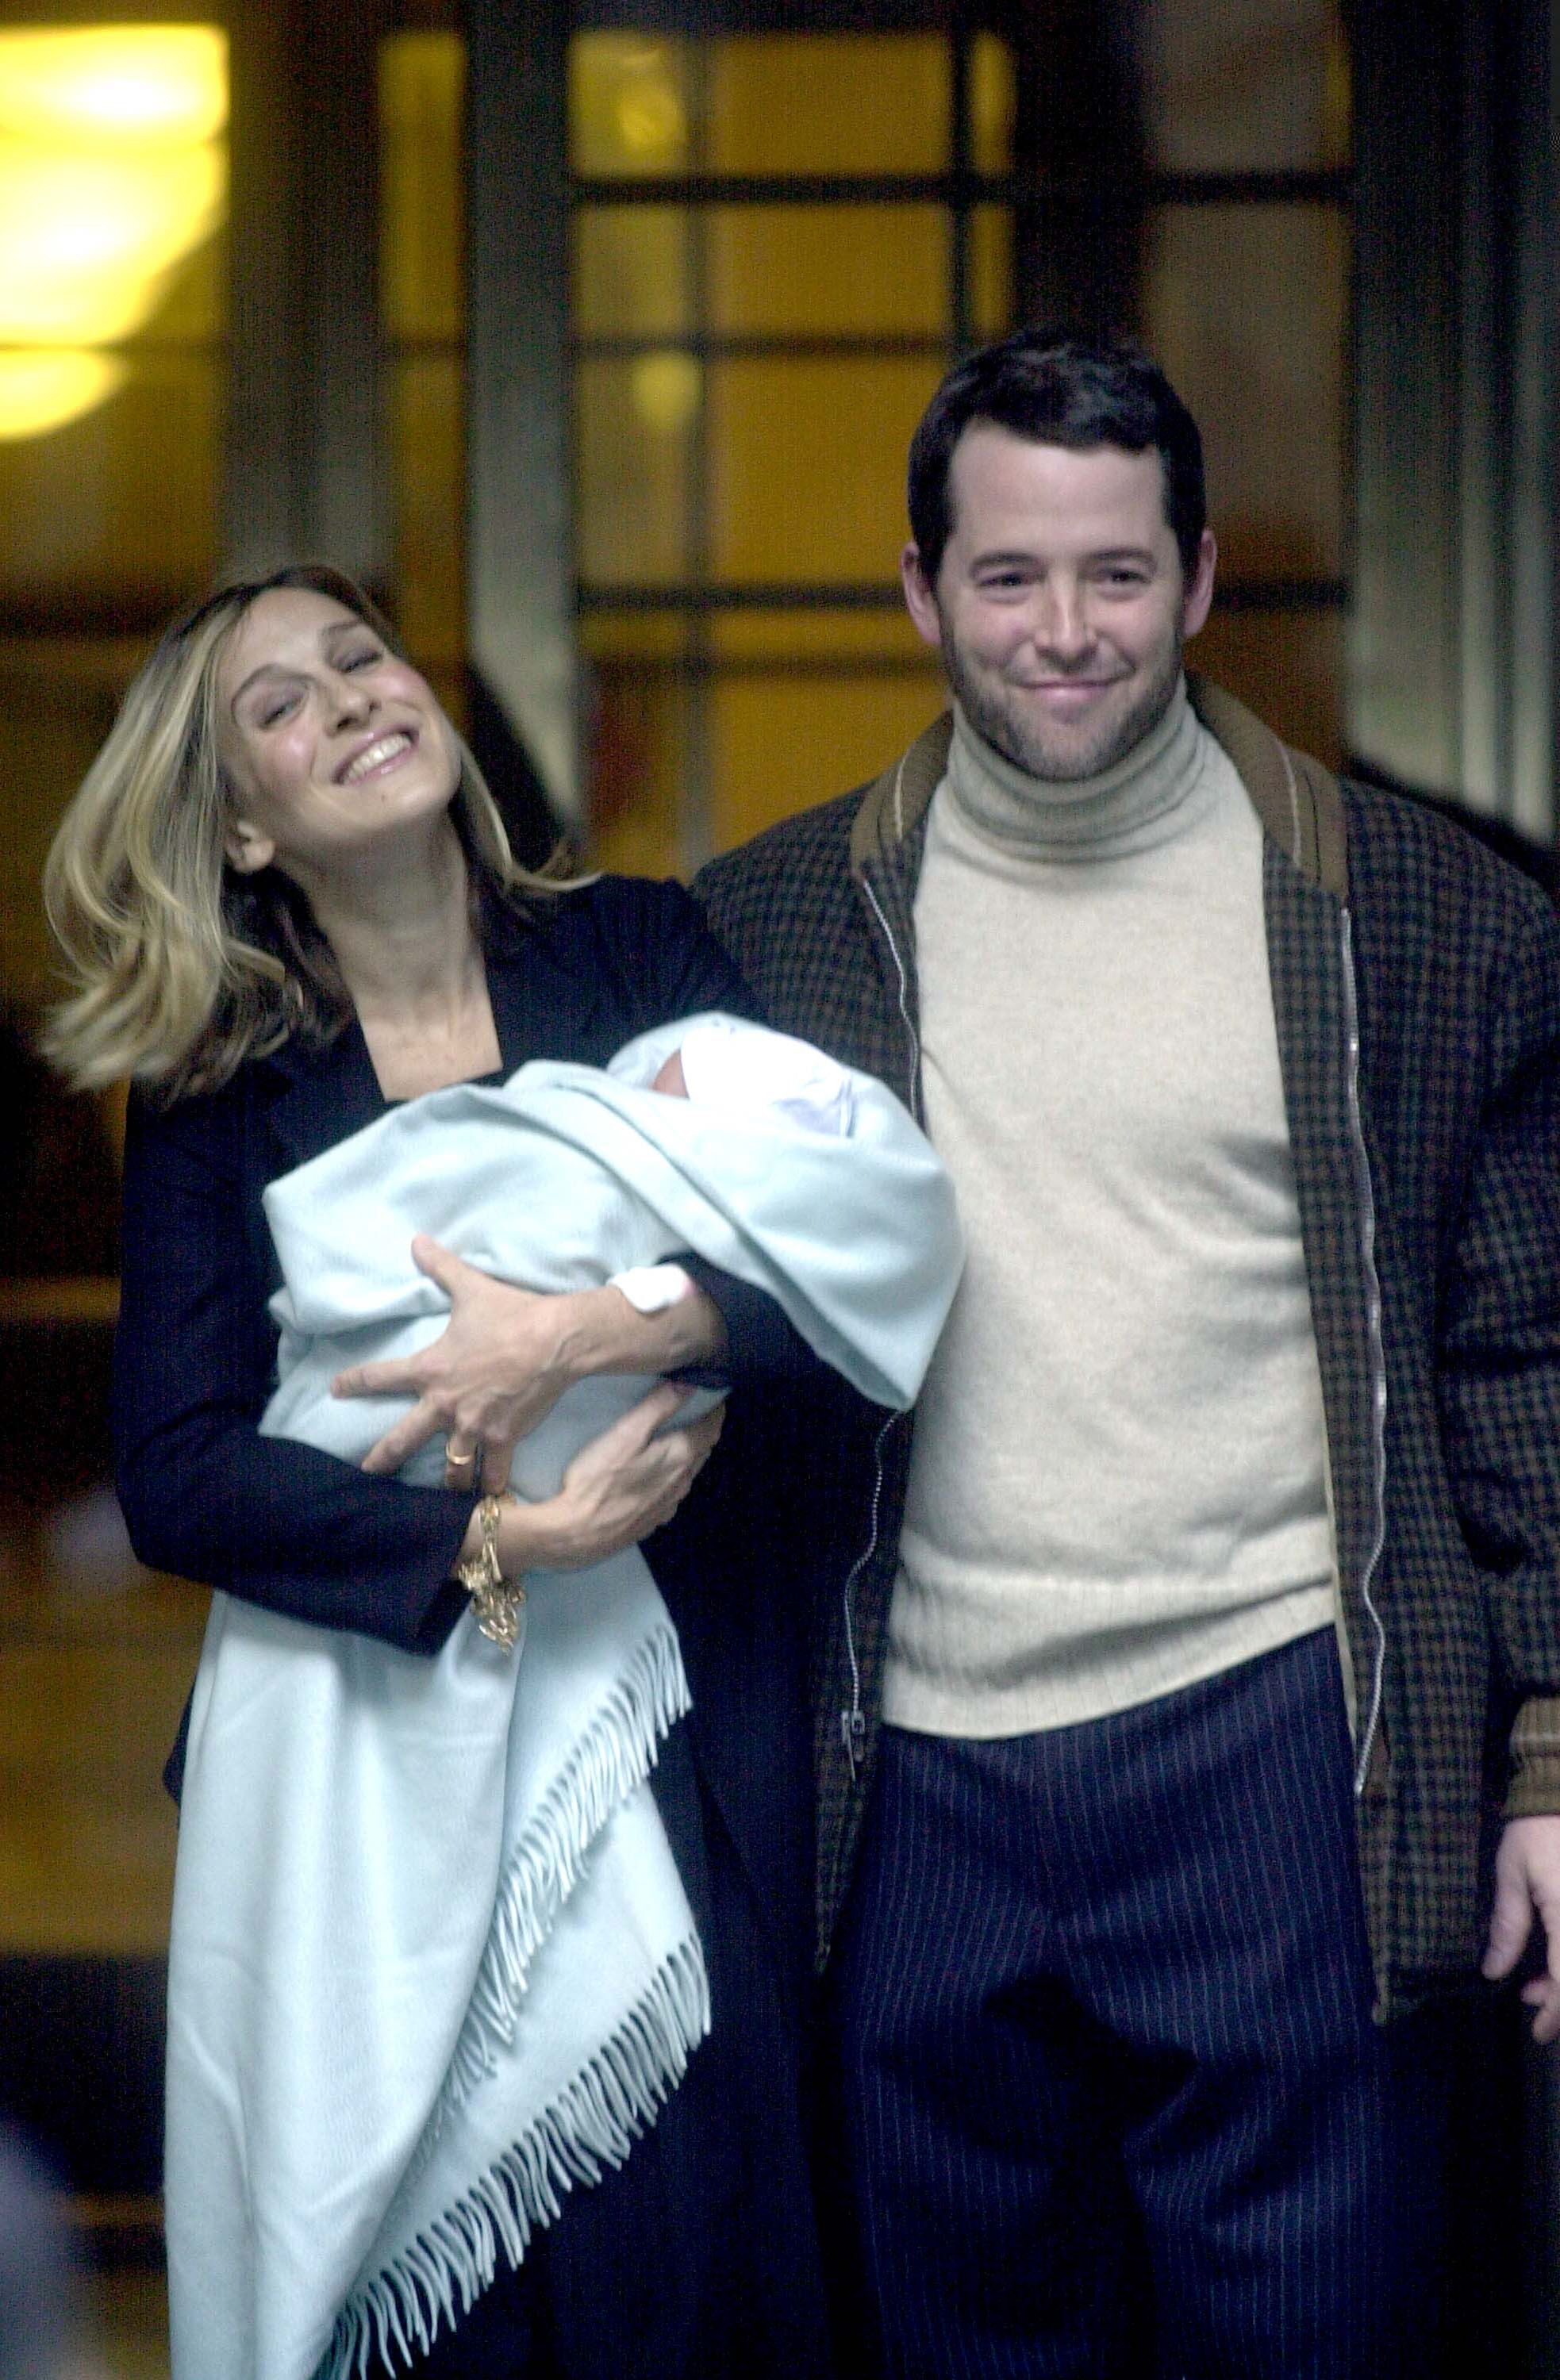 Actress Sarah Jessica Parker (L), her husband actor Matthew Broderick and their newborn son, James Wilke Broderick, leave Lennox Hill Hospital November 1, 2002 in New York City | Photo: Getty Images